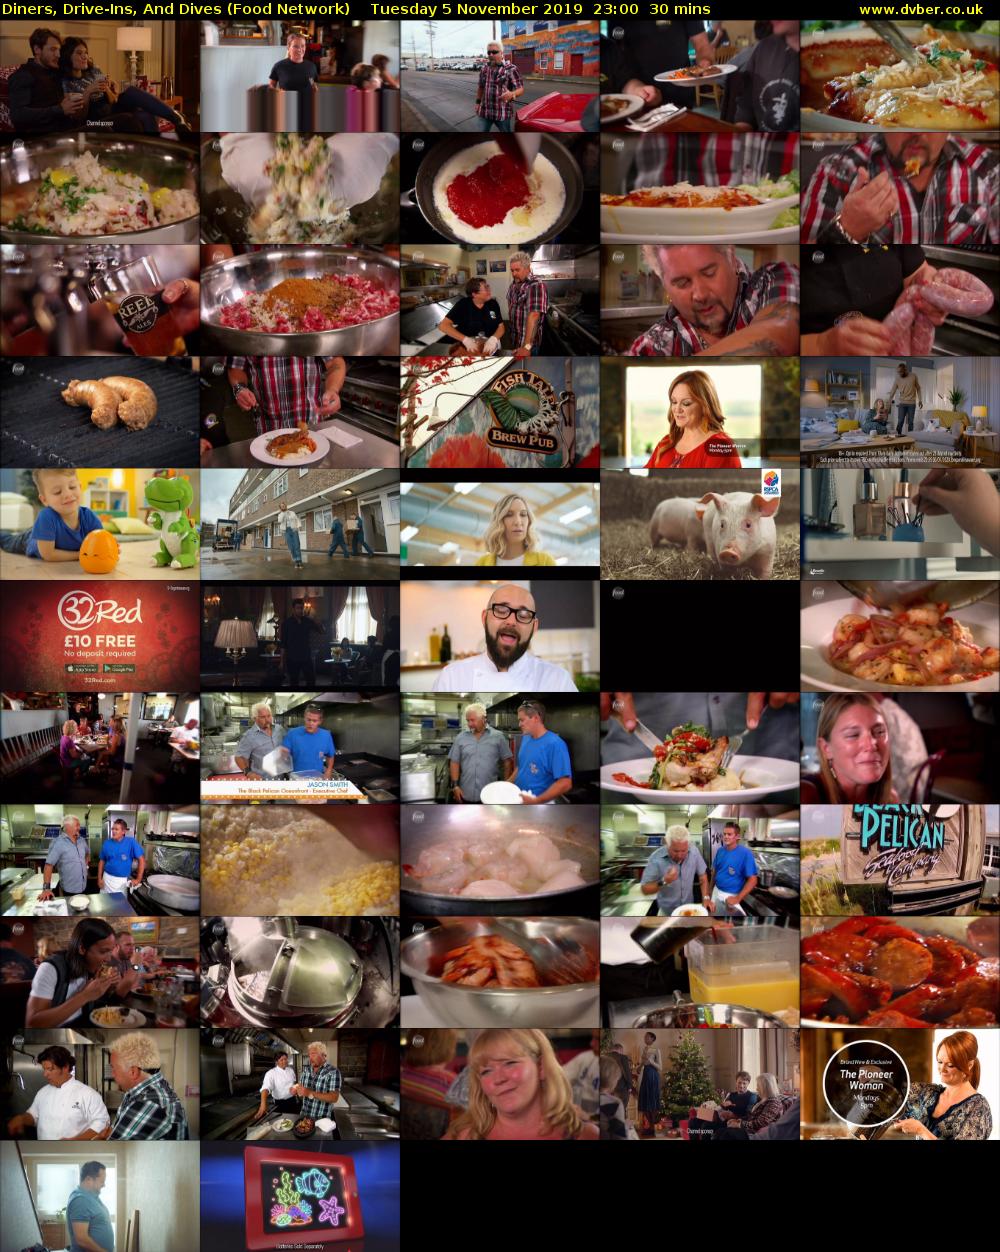 Diners, Drive-Ins, And Dives (Food Network) Tuesday 5 November 2019 23:00 - 23:30